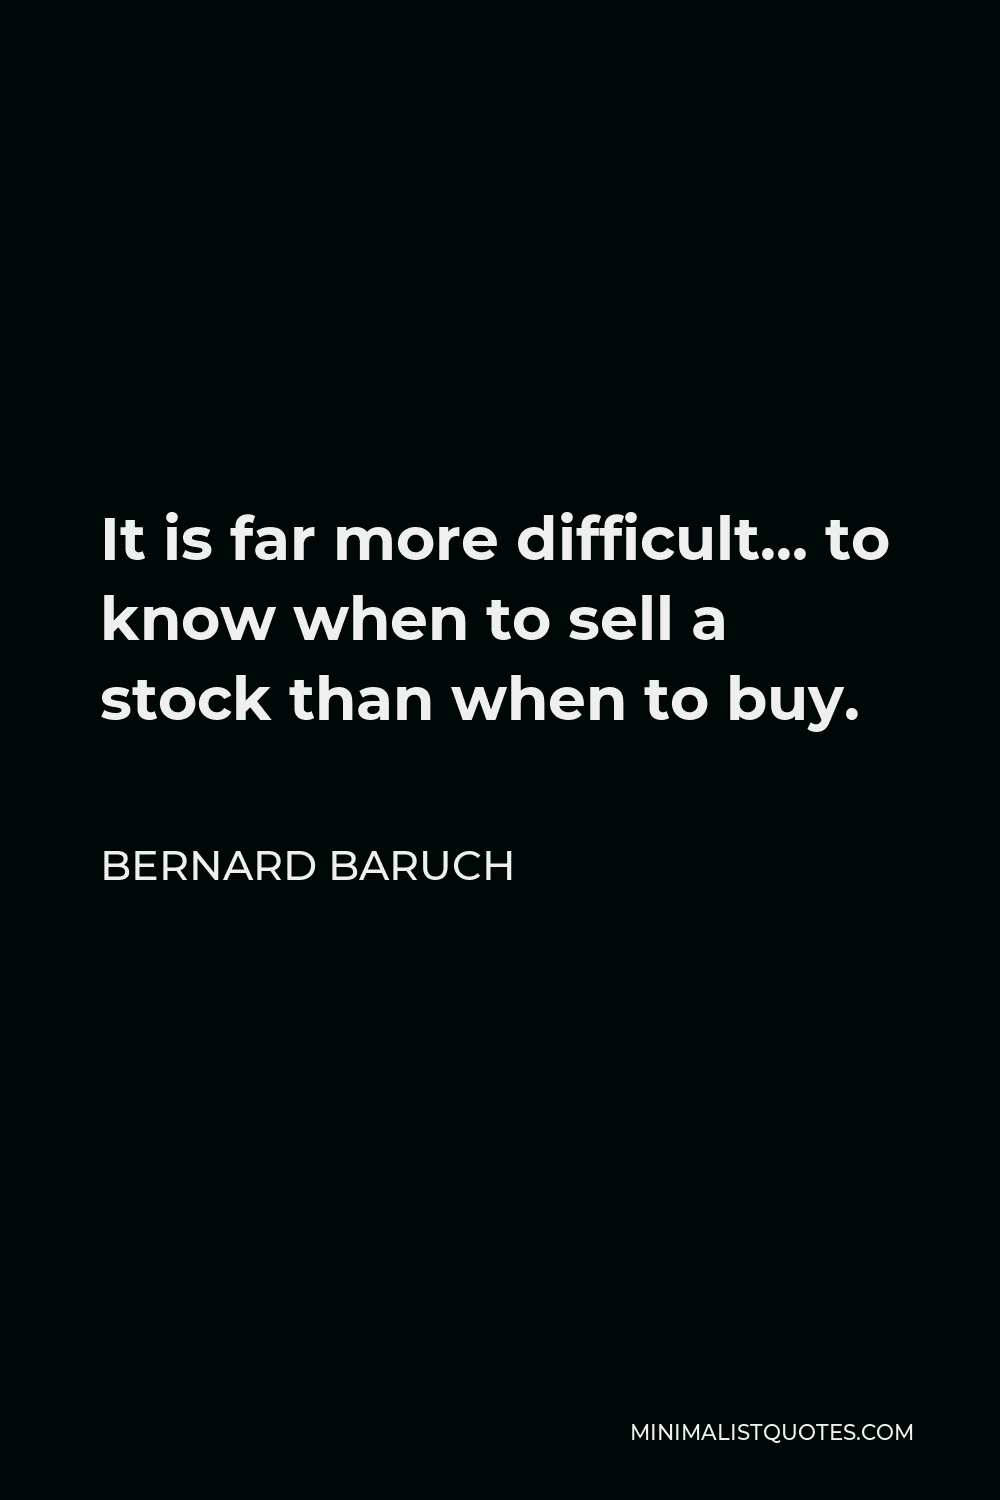 Bernard Baruch Quote - It is far more difficult… to know when to sell a stock than when to buy.